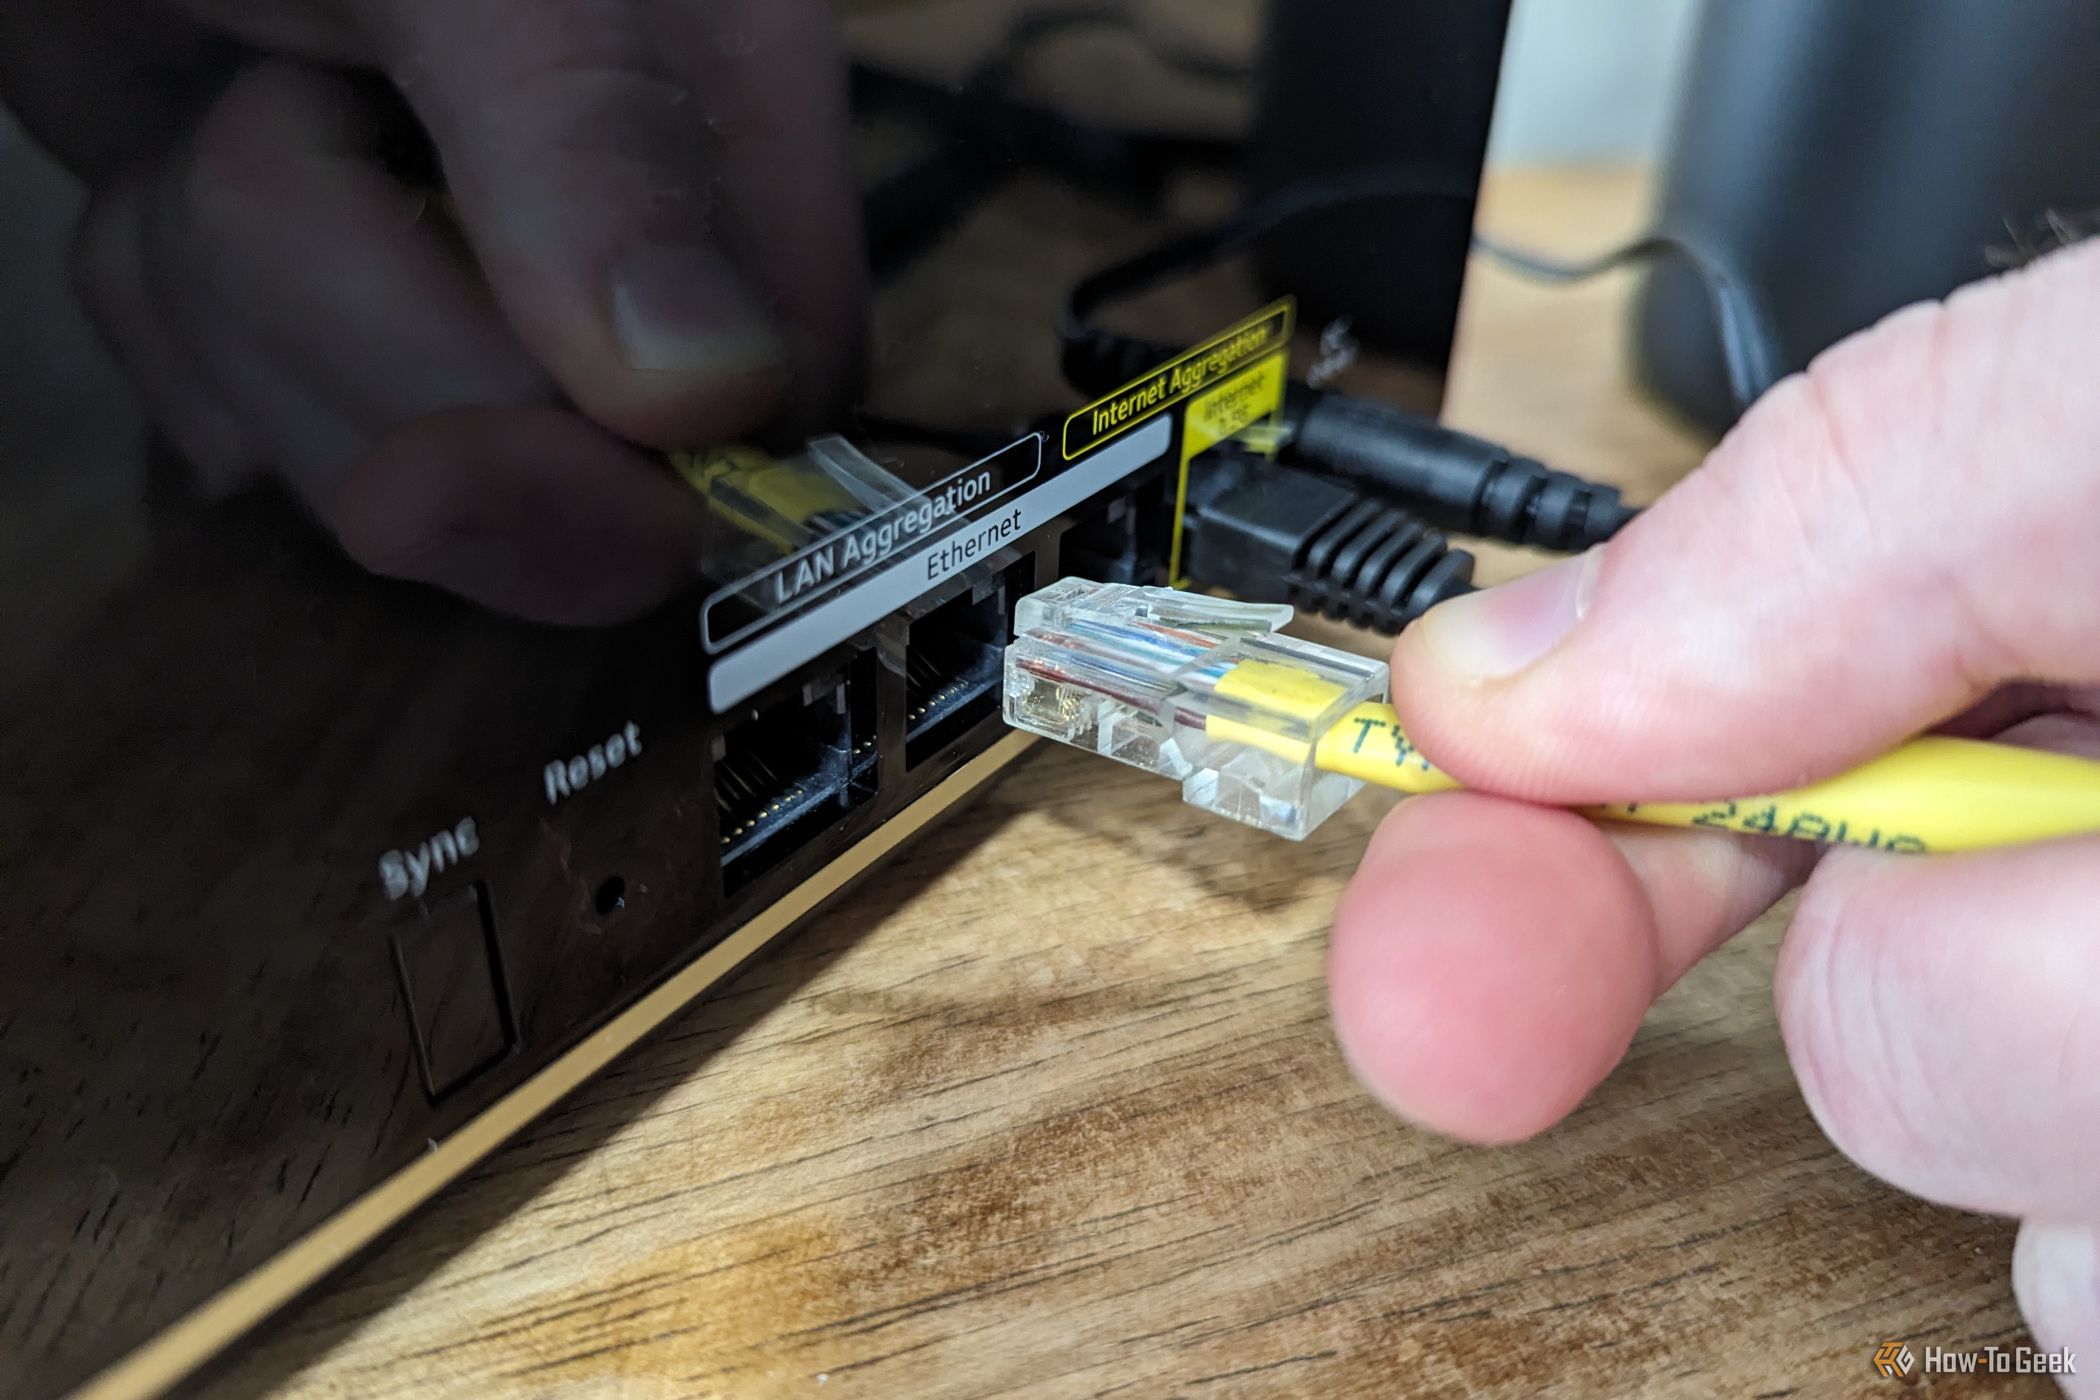 Person connecting an Ethernet cable to the Netgear Nighthawk MK93S main router.